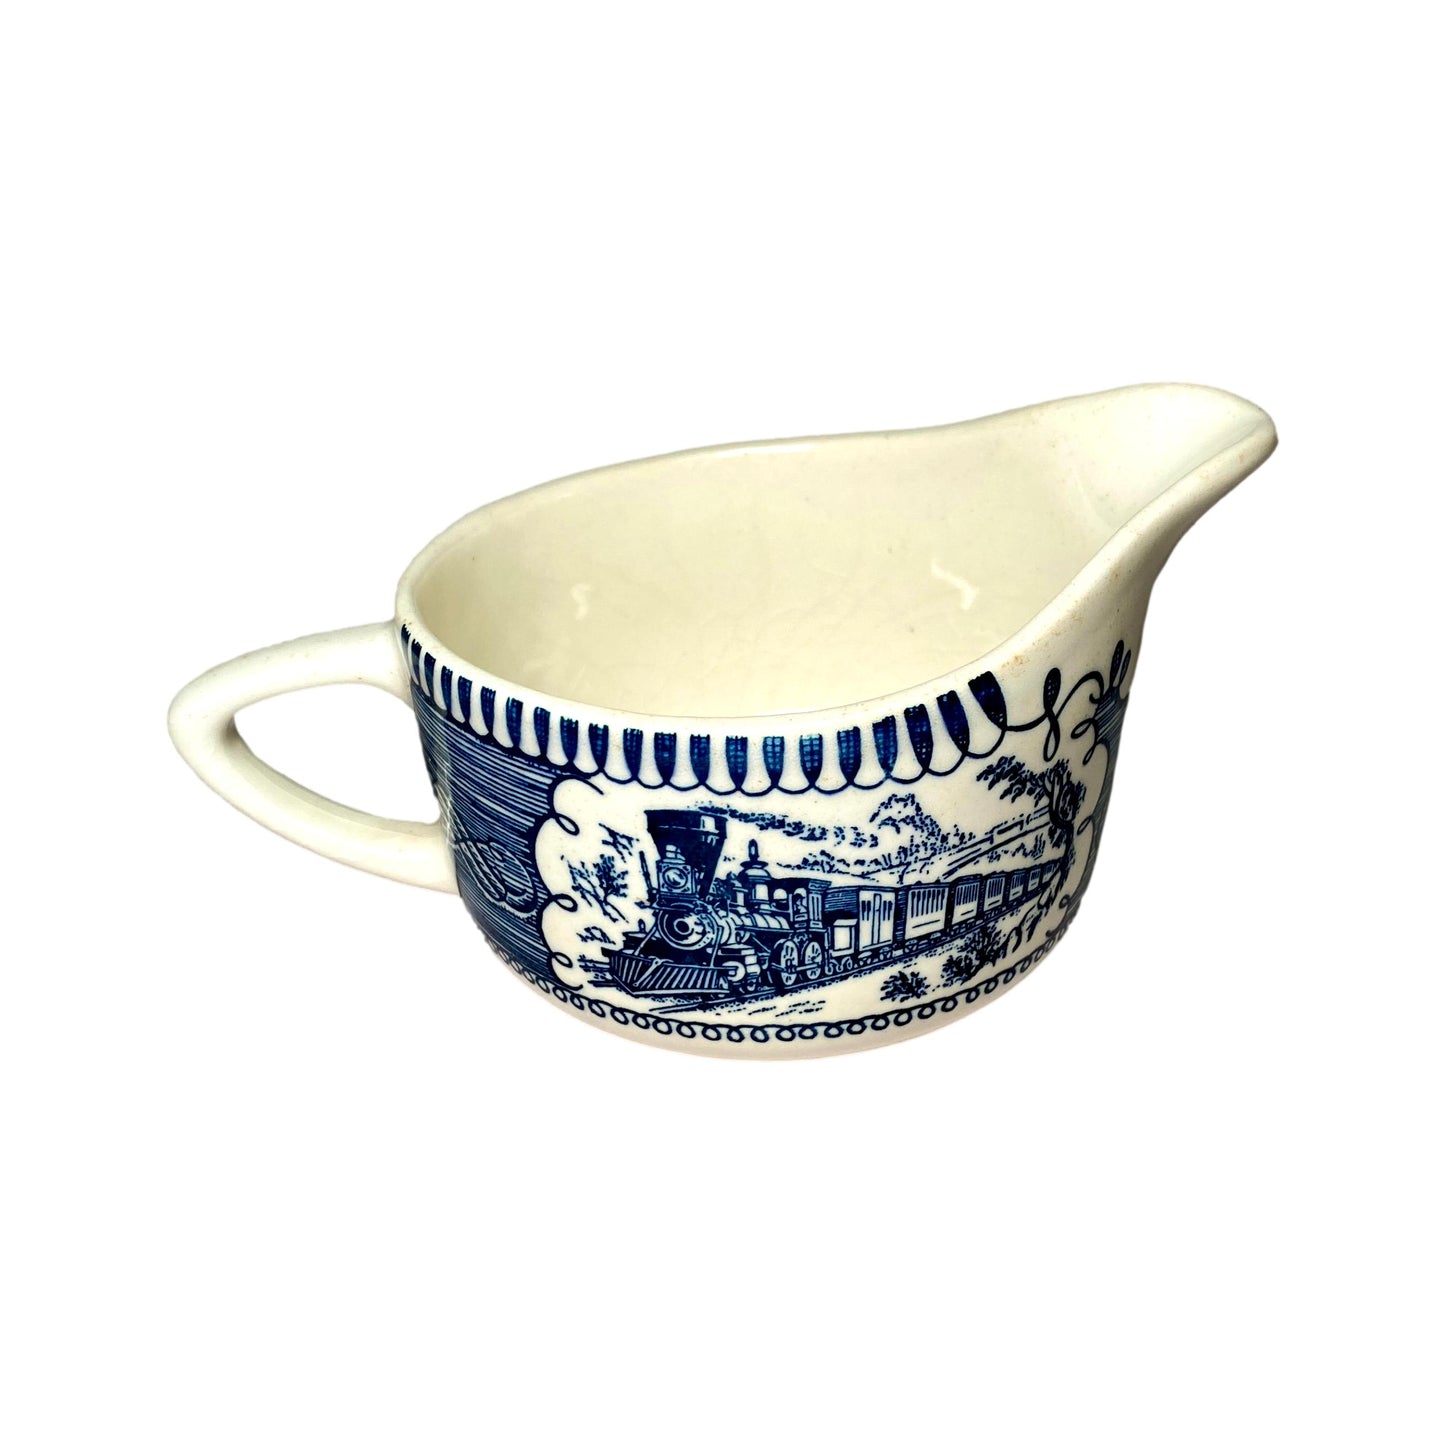 Currier & Ives Gravy Boat with Under Plate